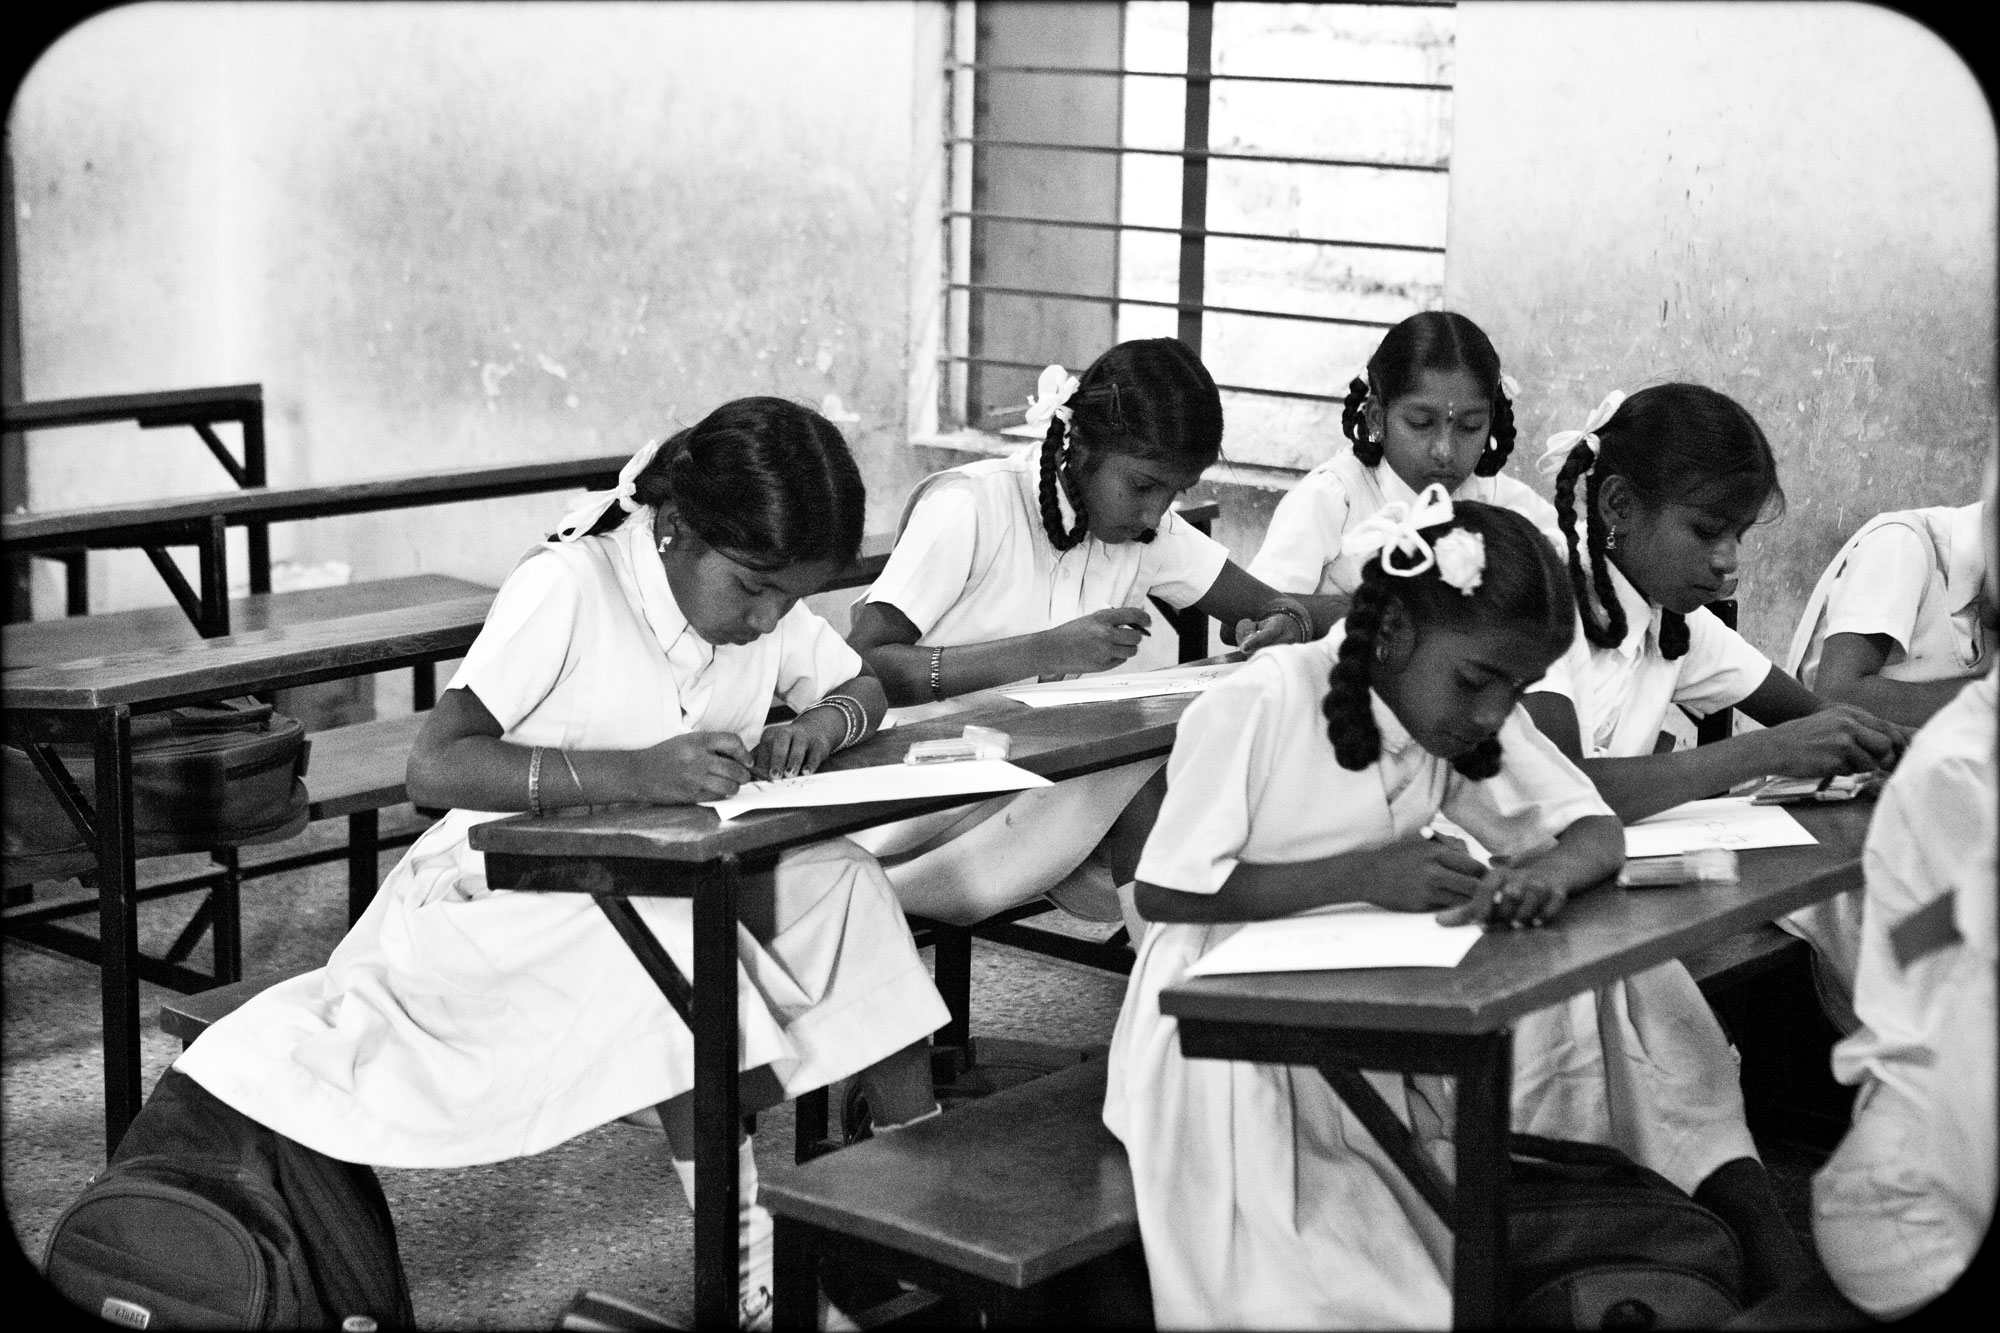 Girls studying in a classroom